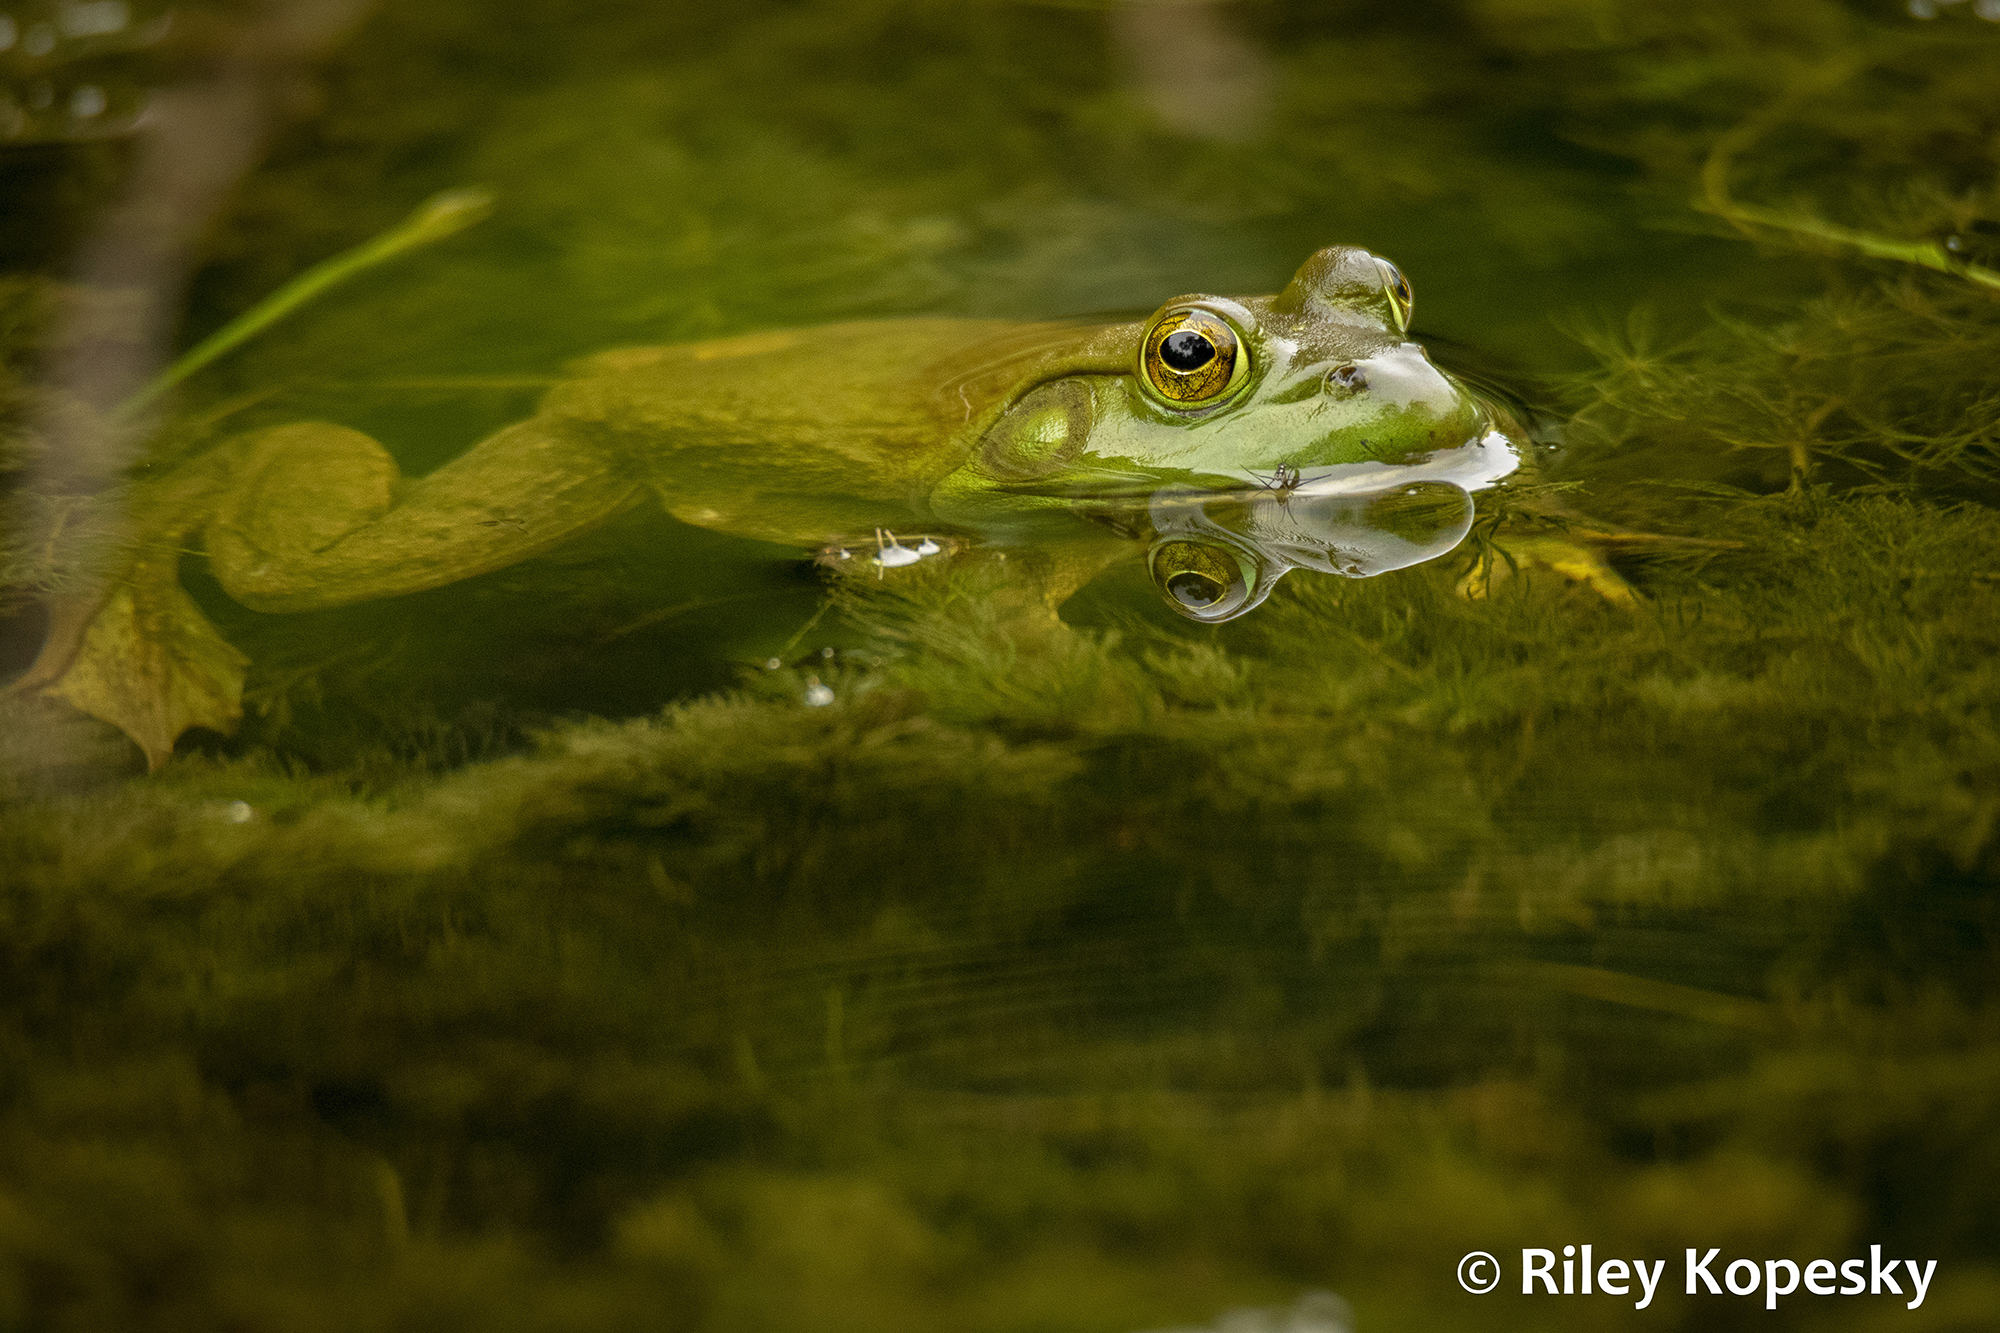 A frog peeks out of the water above submerged plants